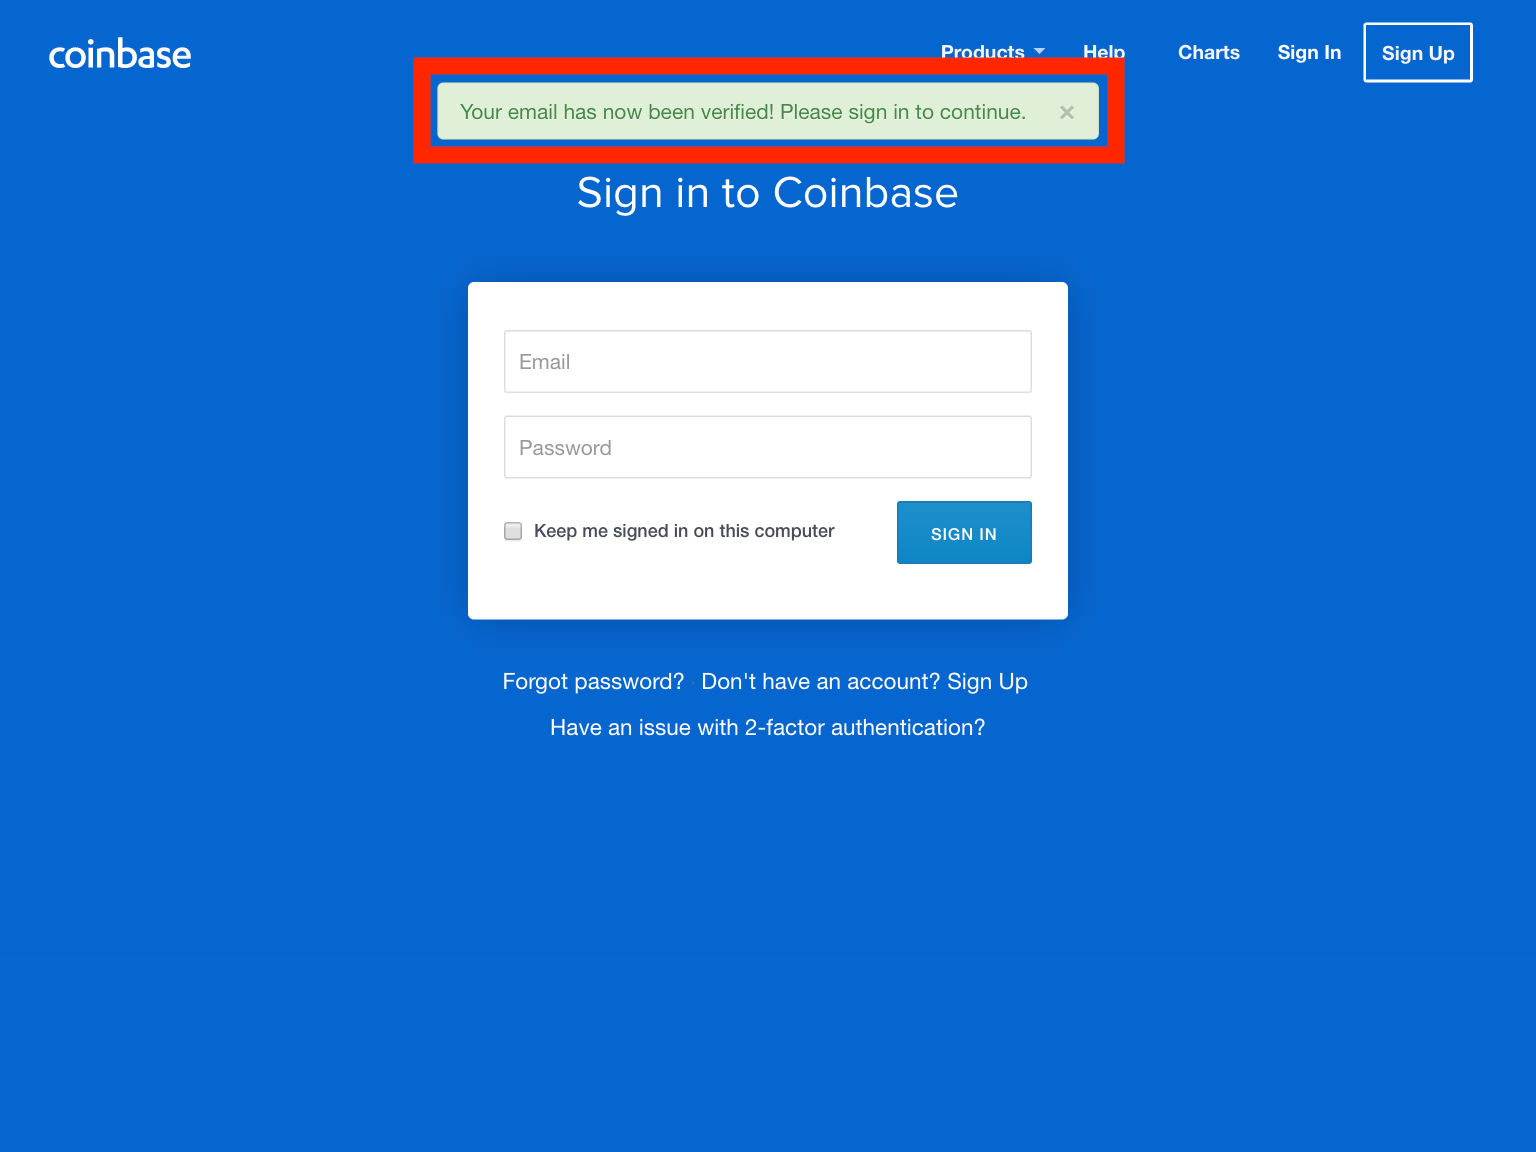 Can I Trust Coinbase With My Id? : Upload Id Card To ...